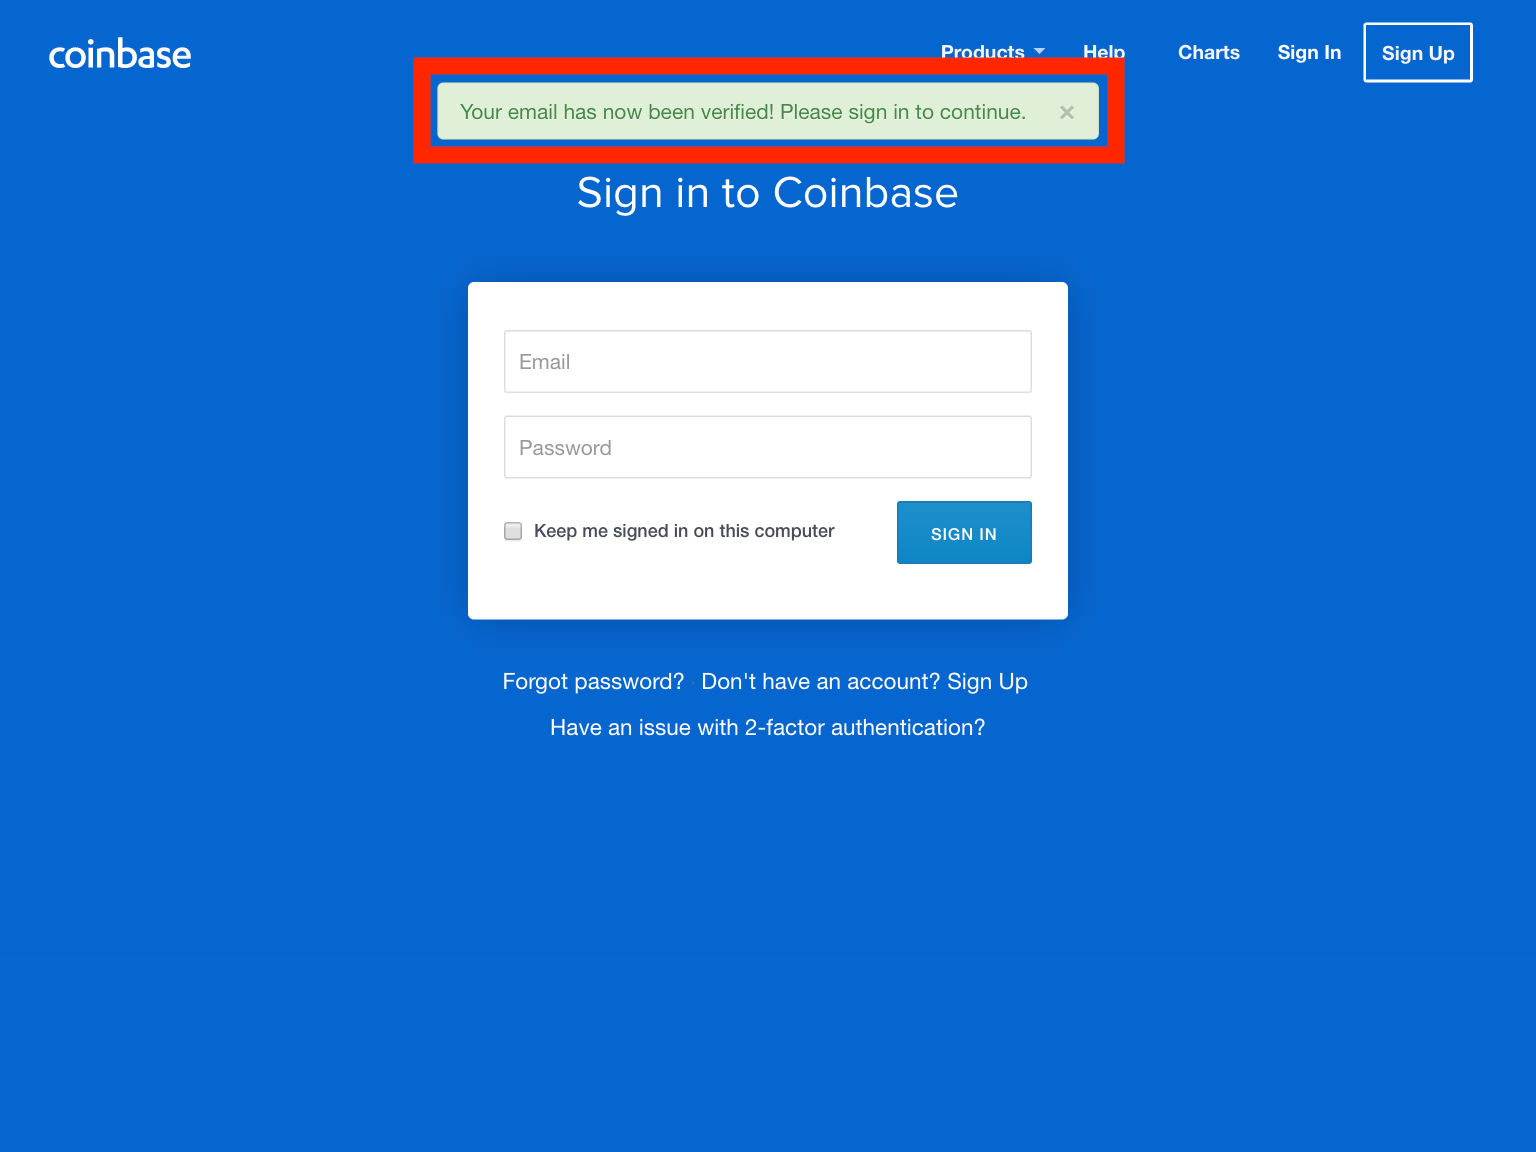 Can I Trust Coinbase With My Id? : Upload Id Card To ...